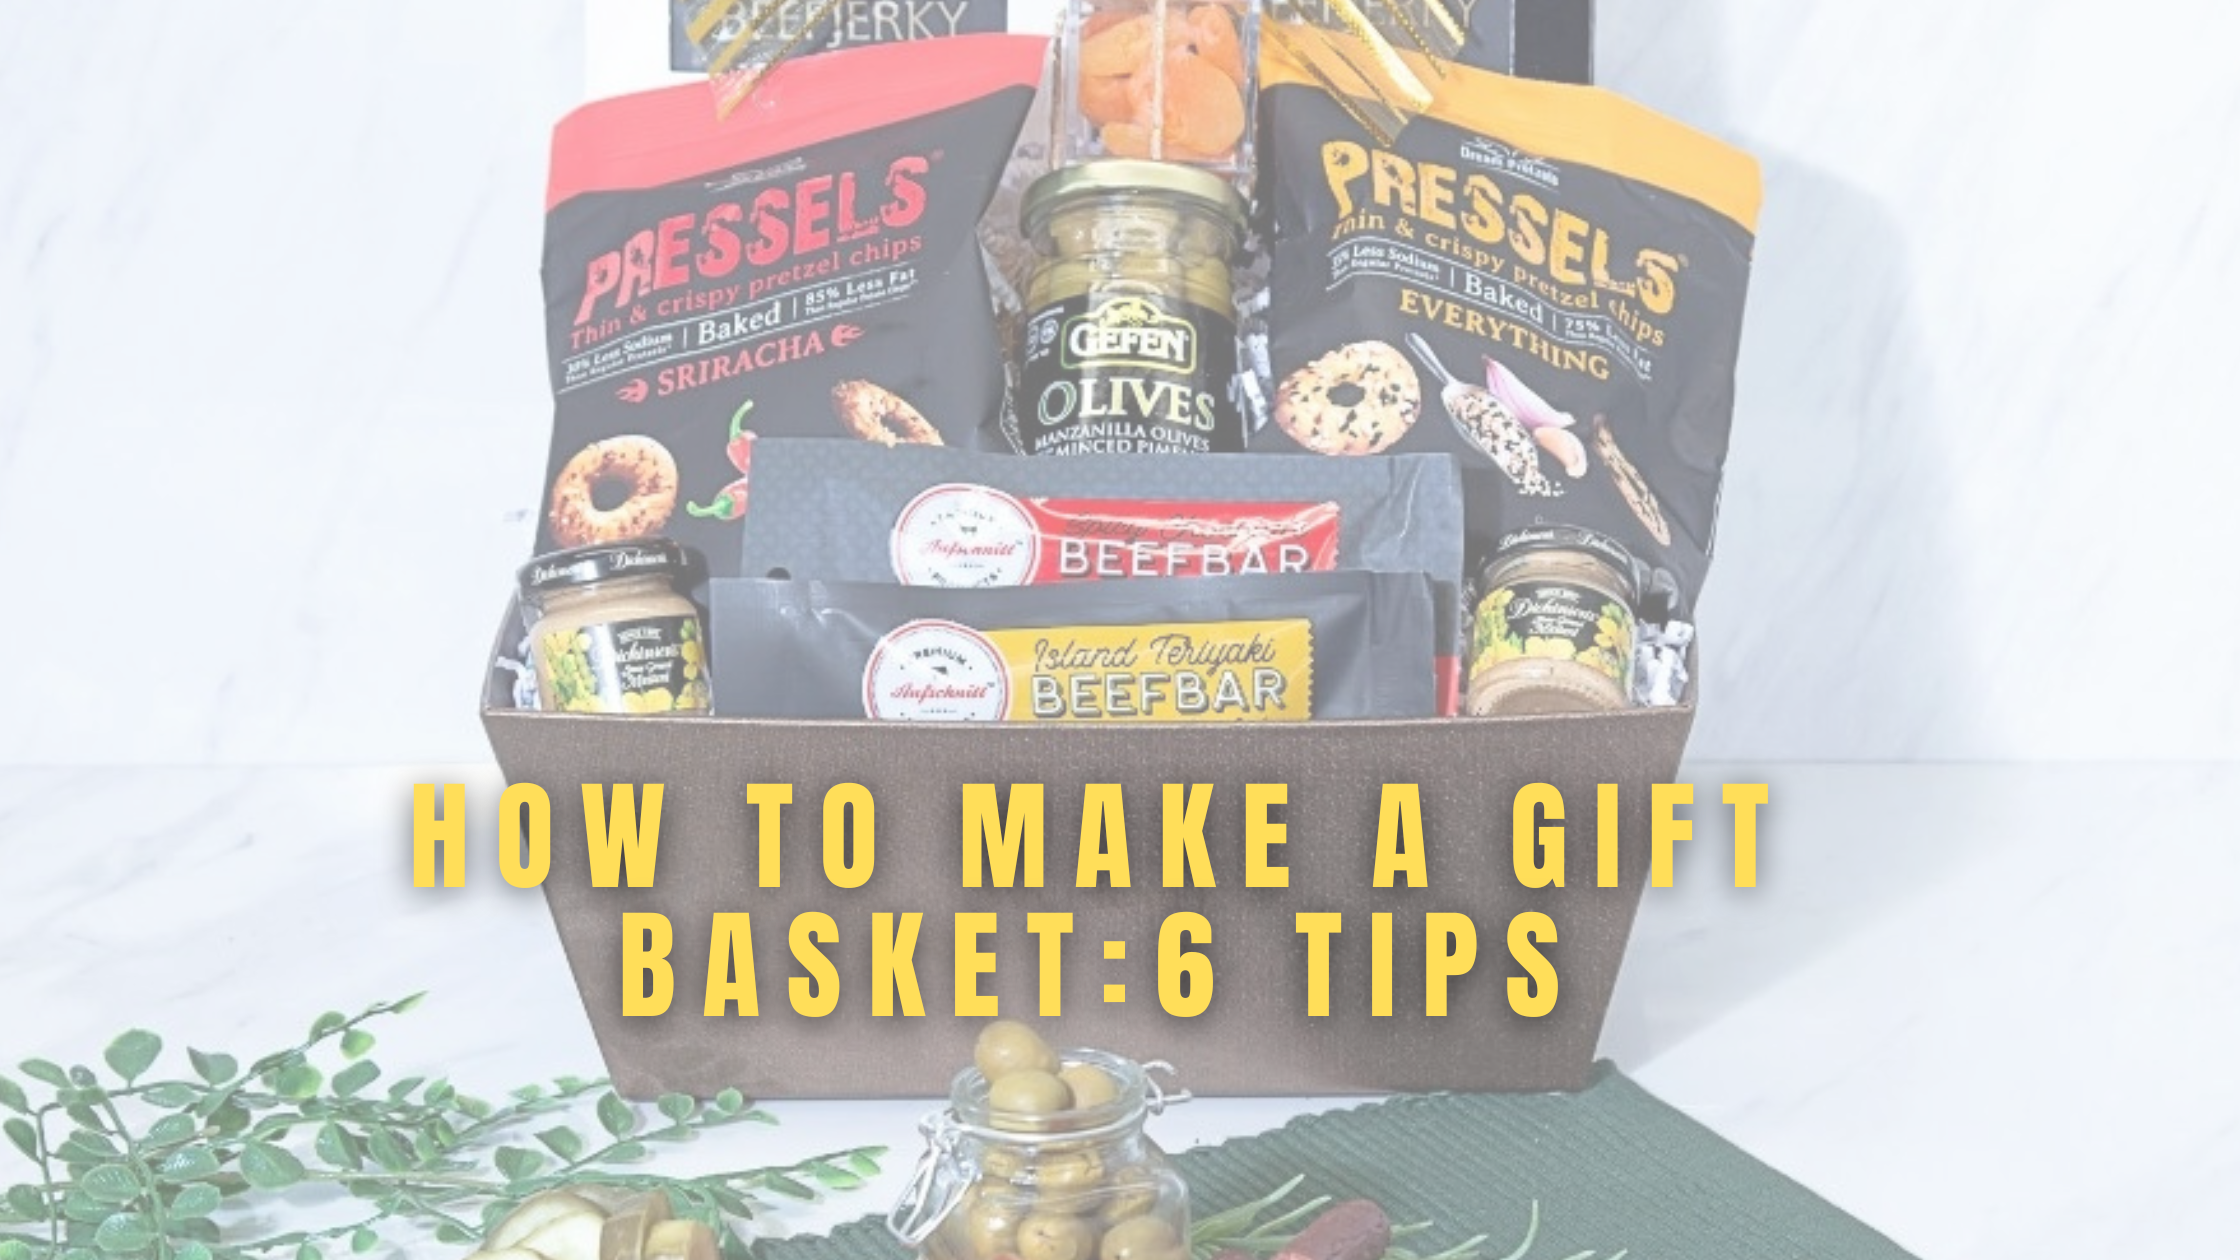 How to Make a Gift Basket: 6 Tips